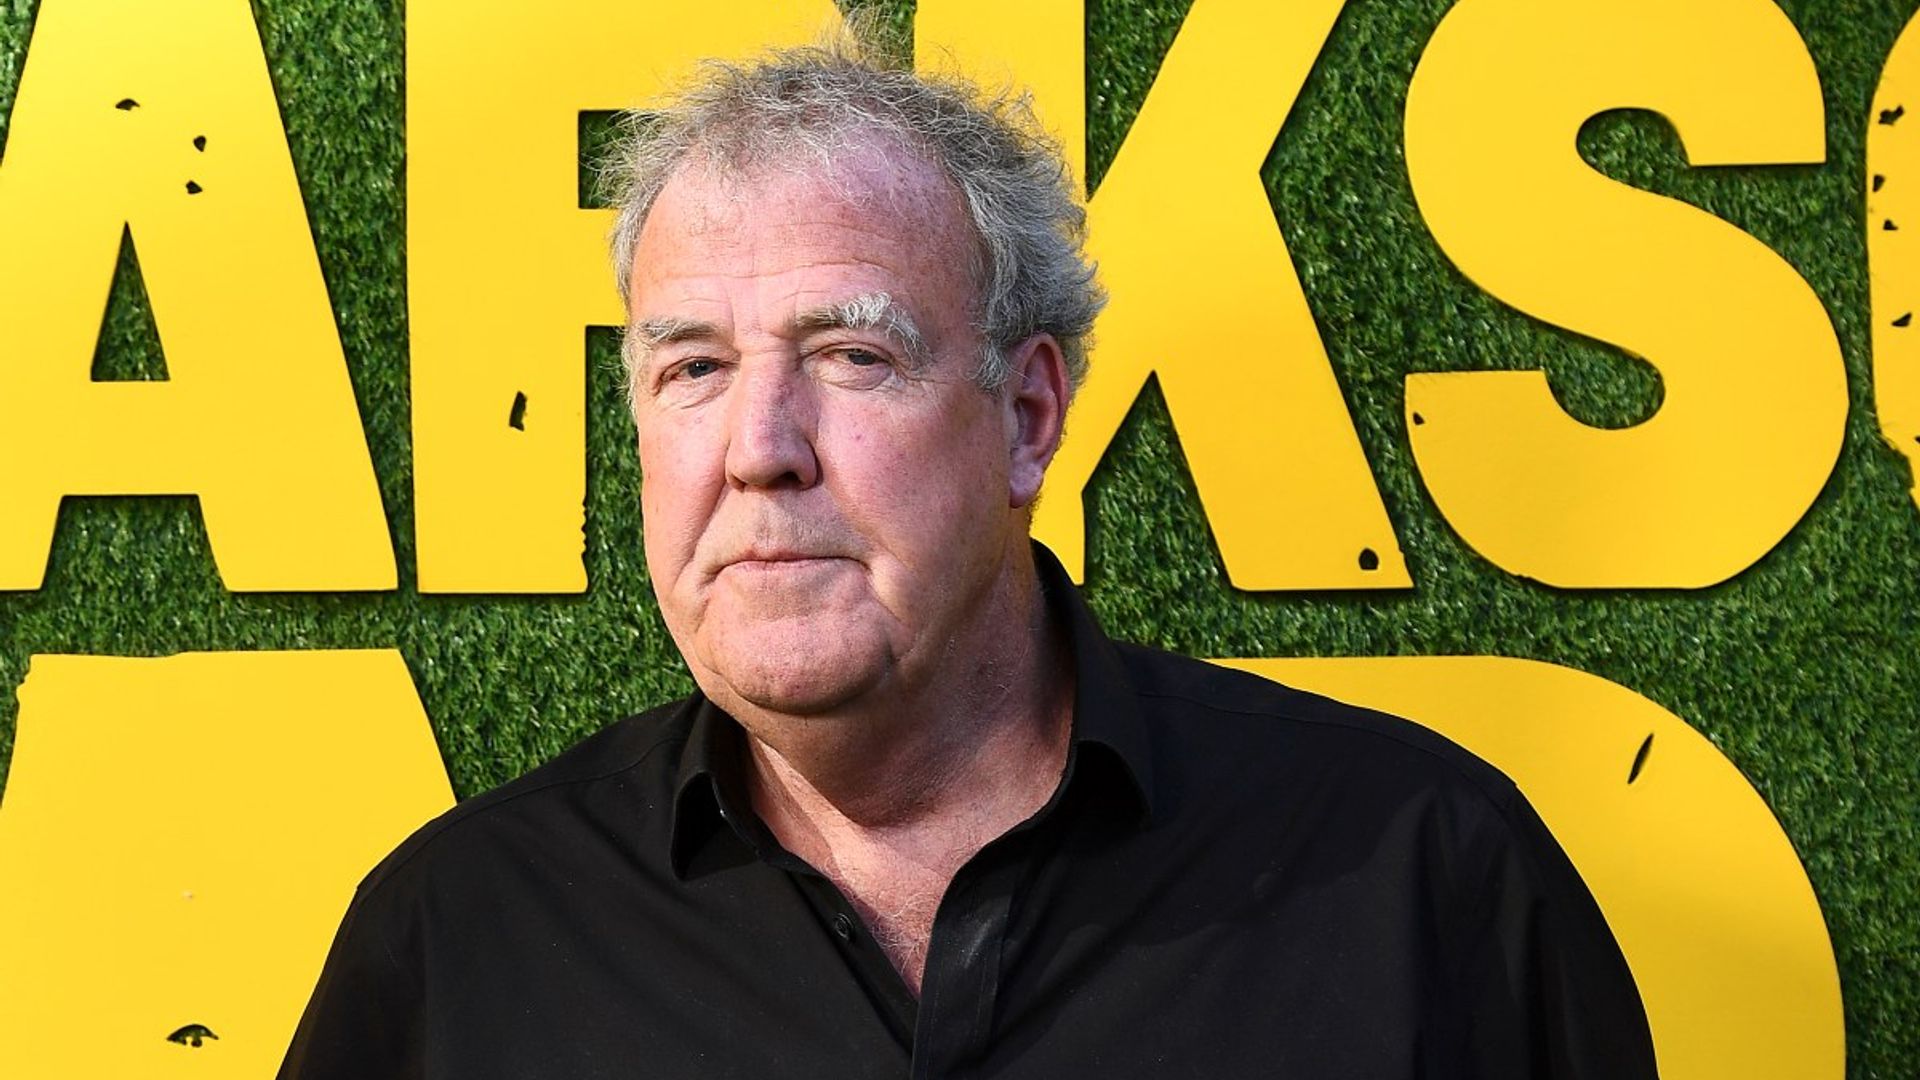 Jeremy Clarkson has 'awful accident' on Clarkson's Farm – details